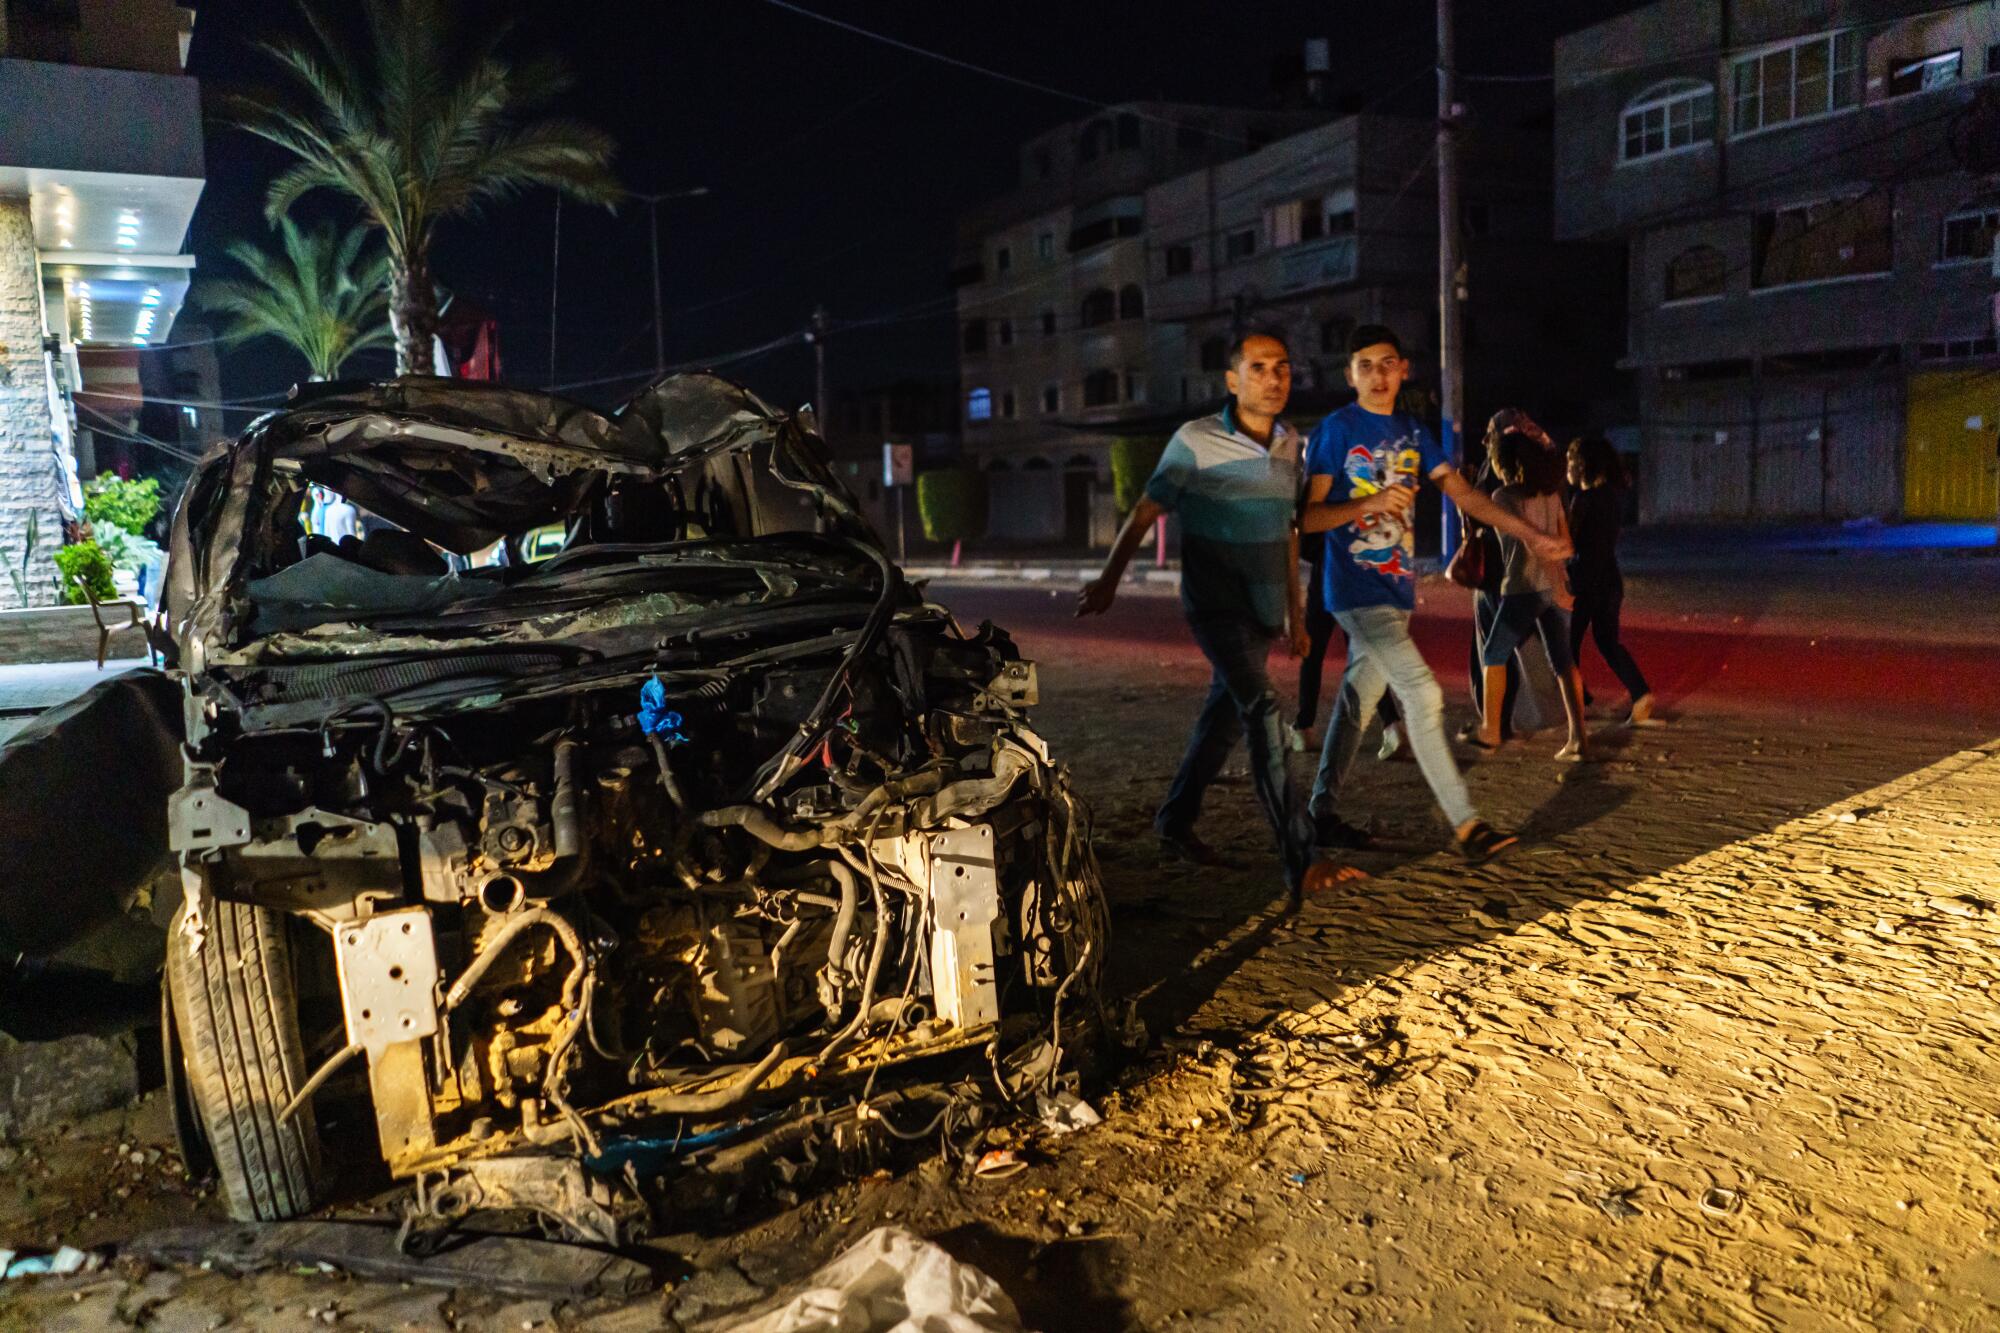 Palestinian pedestrians near a bombed-out car in Gaza City